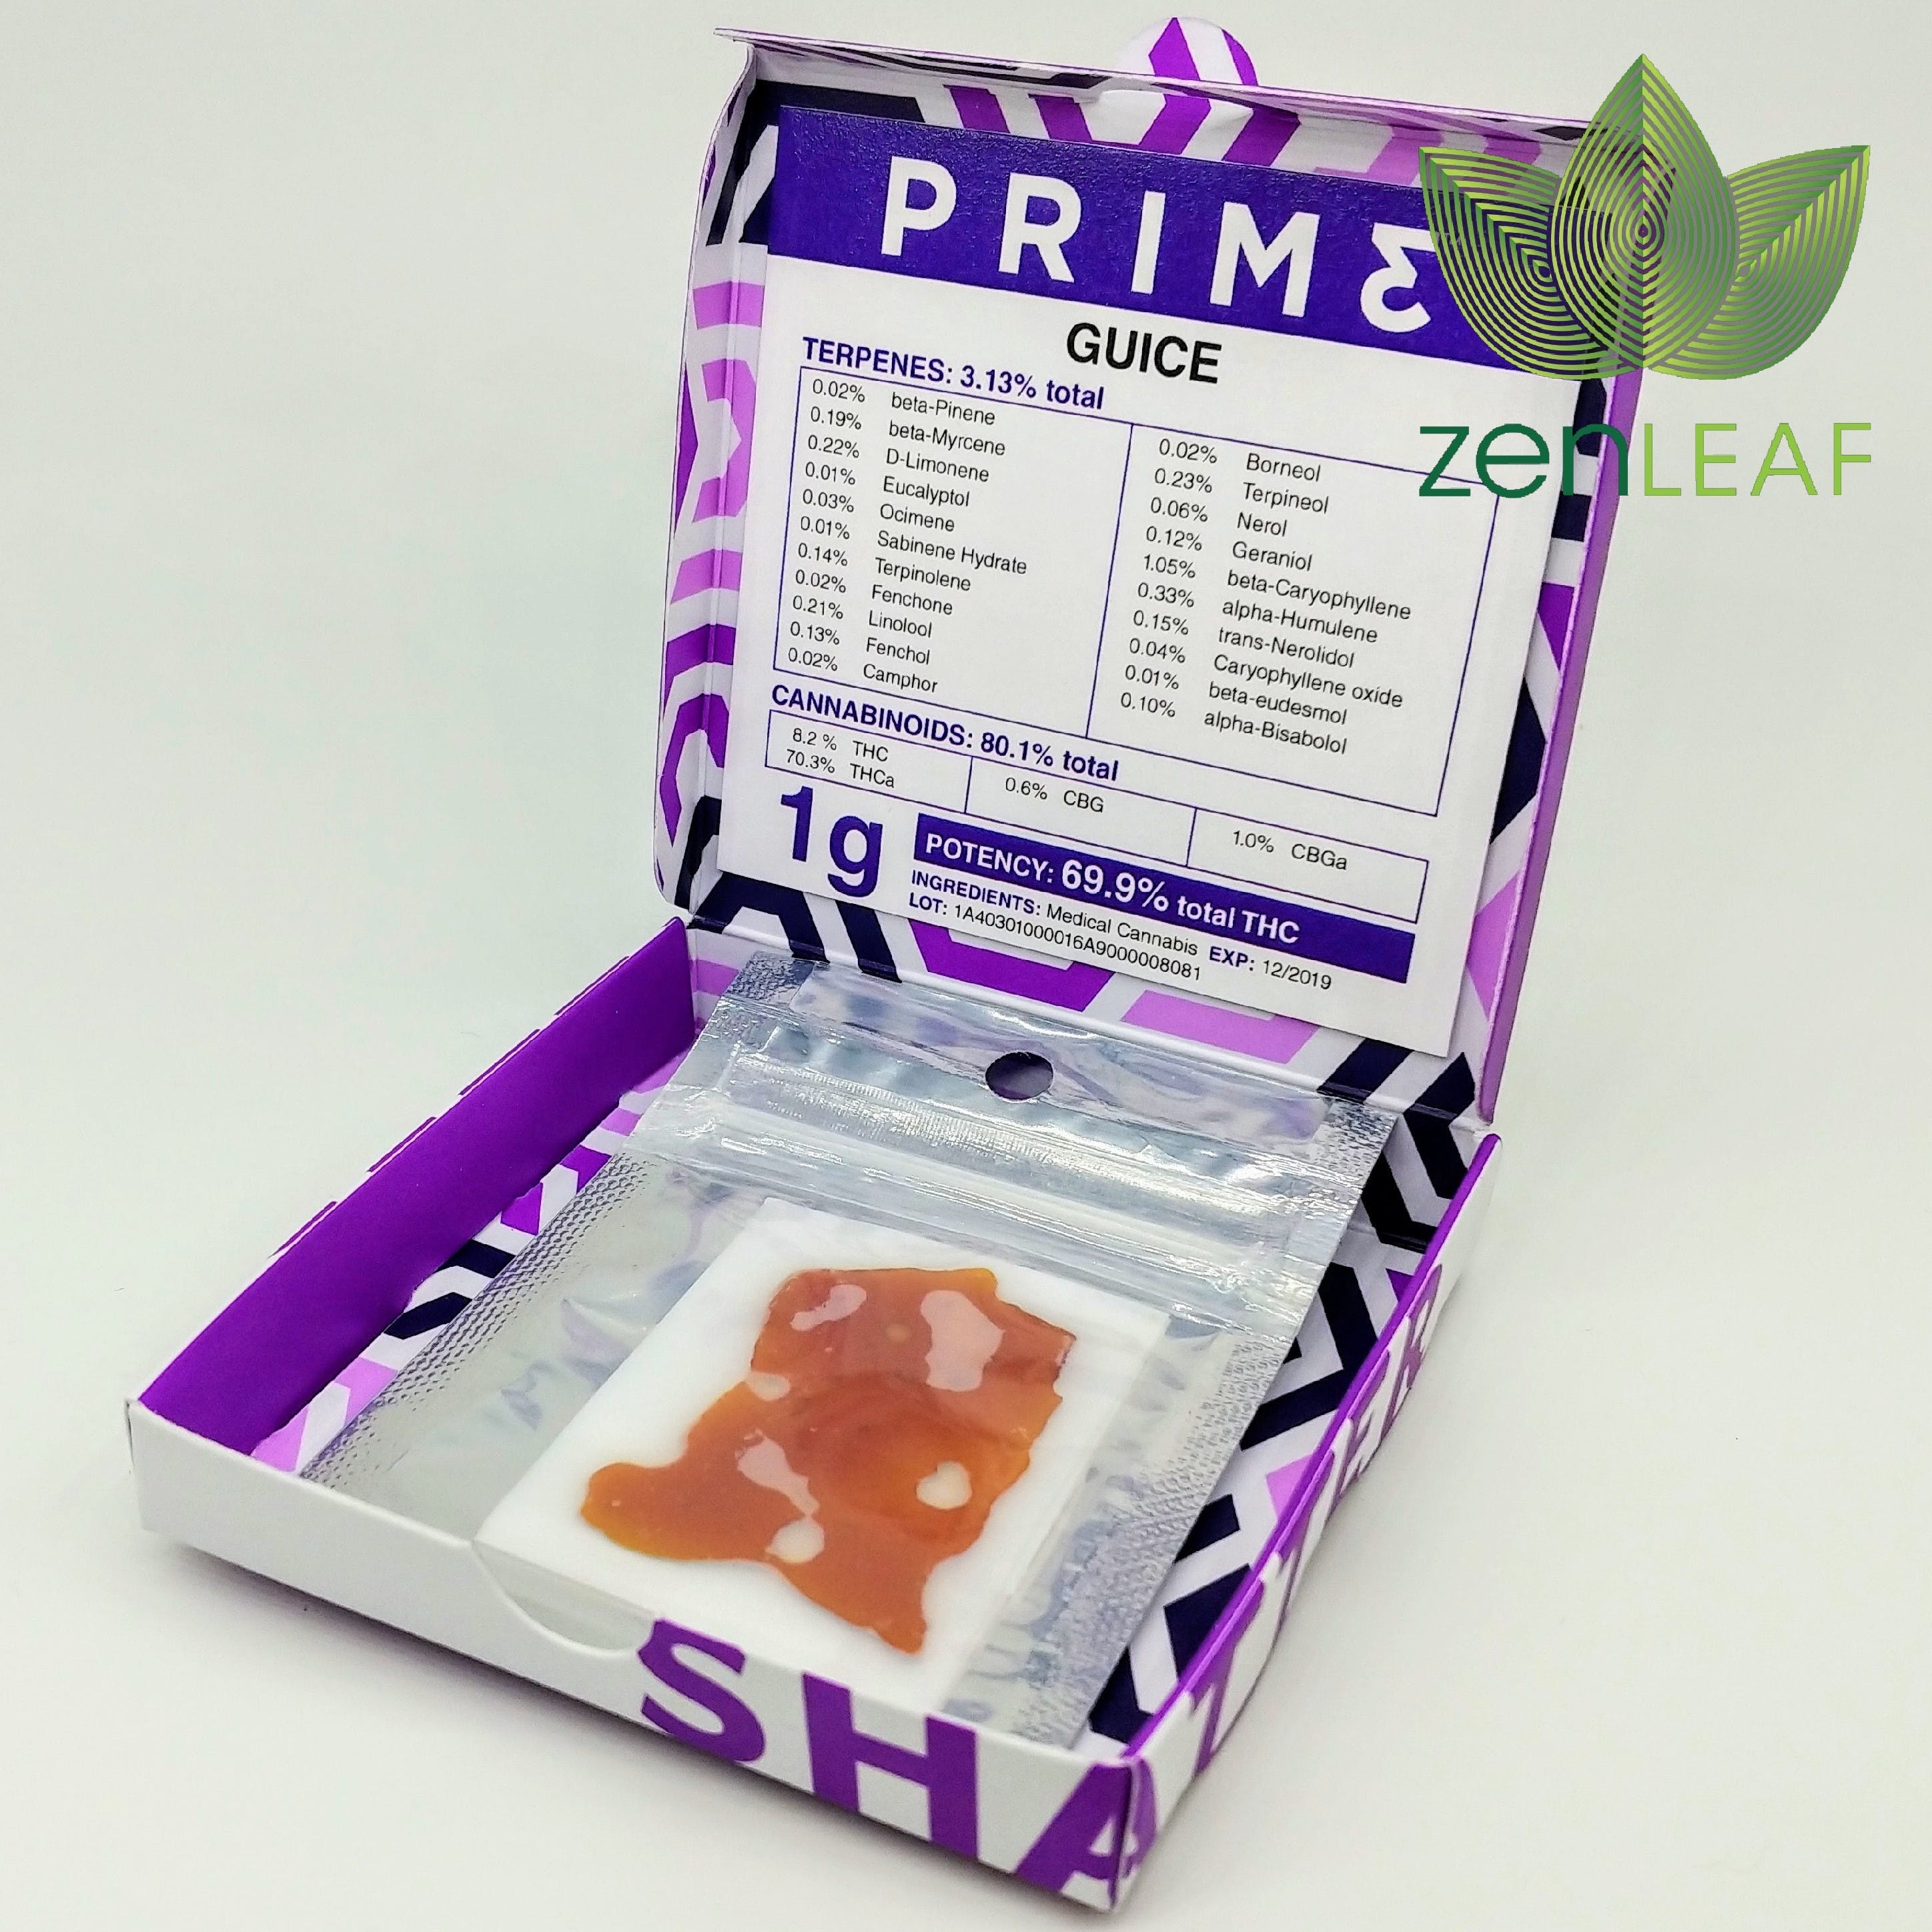 marijuana-dispensaries-7221-montevideo-road-2c-ste-150-jessup-guice-shatter-by-prime-extracts